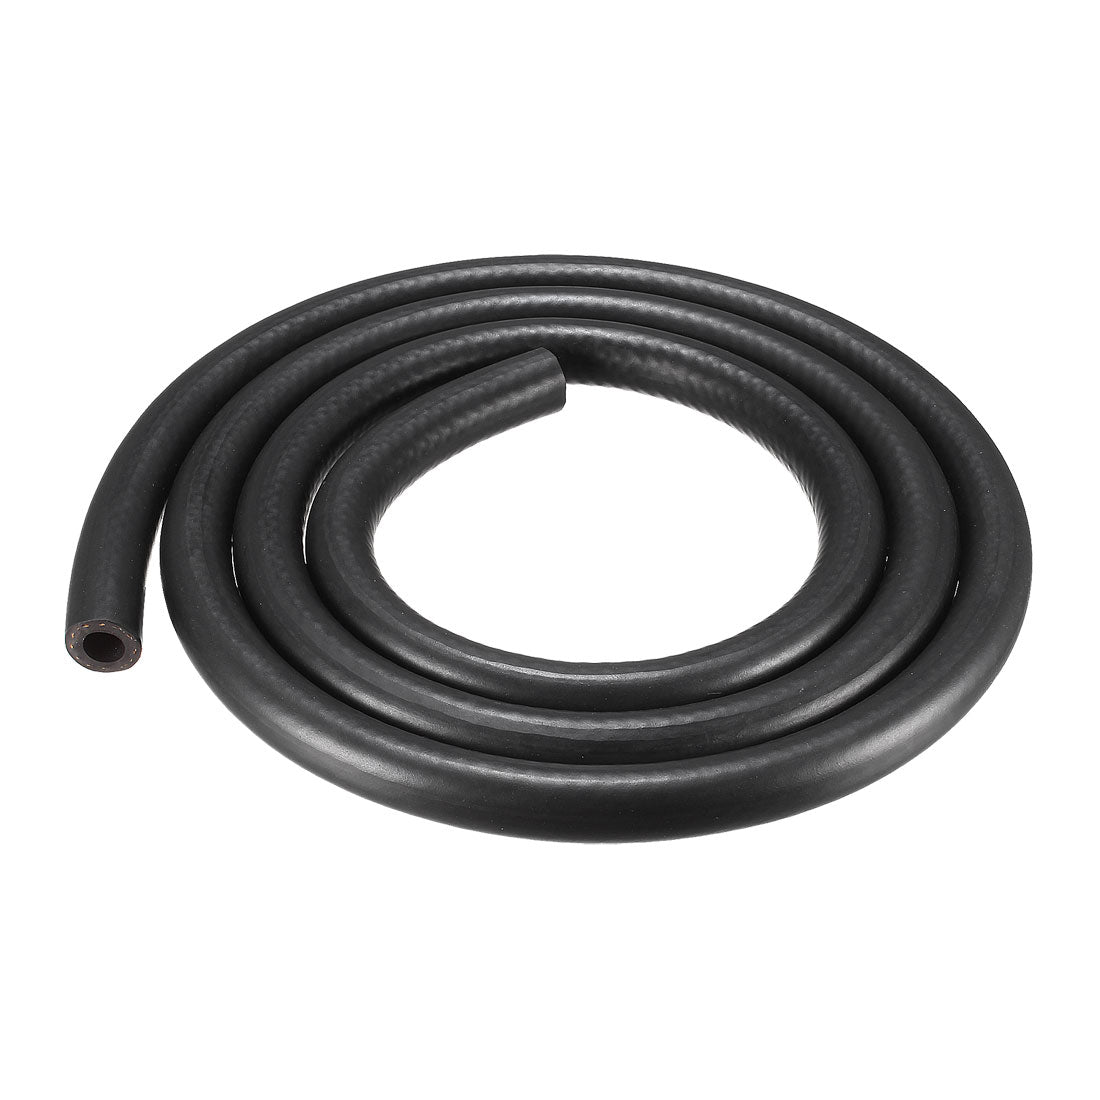 uxcell Uxcell Fuel Line Fuel Hose Rubber  10mm I.D.  1.8M/5.9FT  Diesel Petrol Hose Engine Pipe Tubing